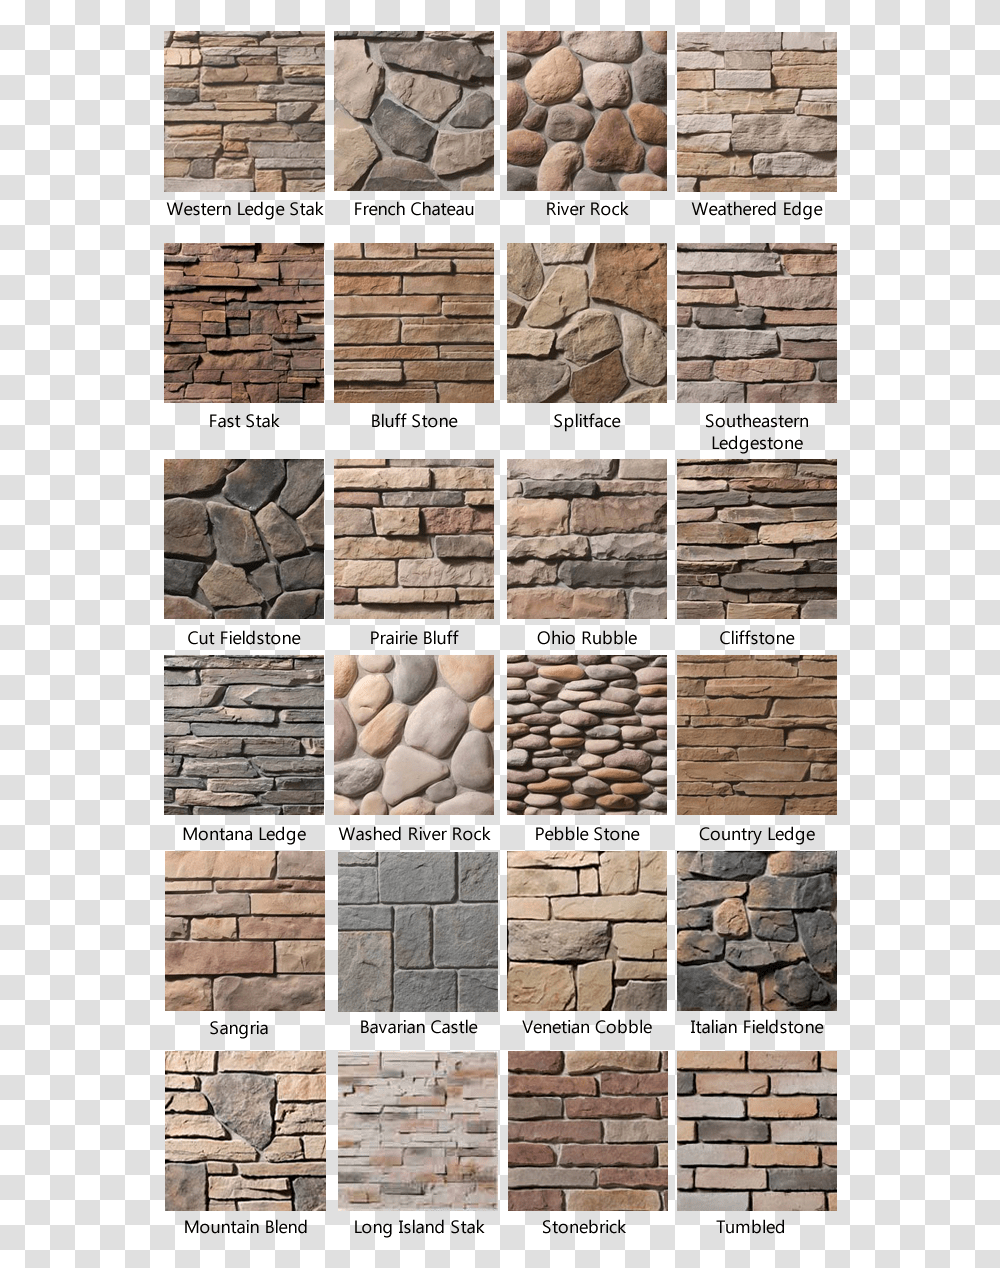 Clip Art Brick Wall Corner Types Of Stones For Houses, Walkway, Path, Sidewalk, Pavement Transparent Png